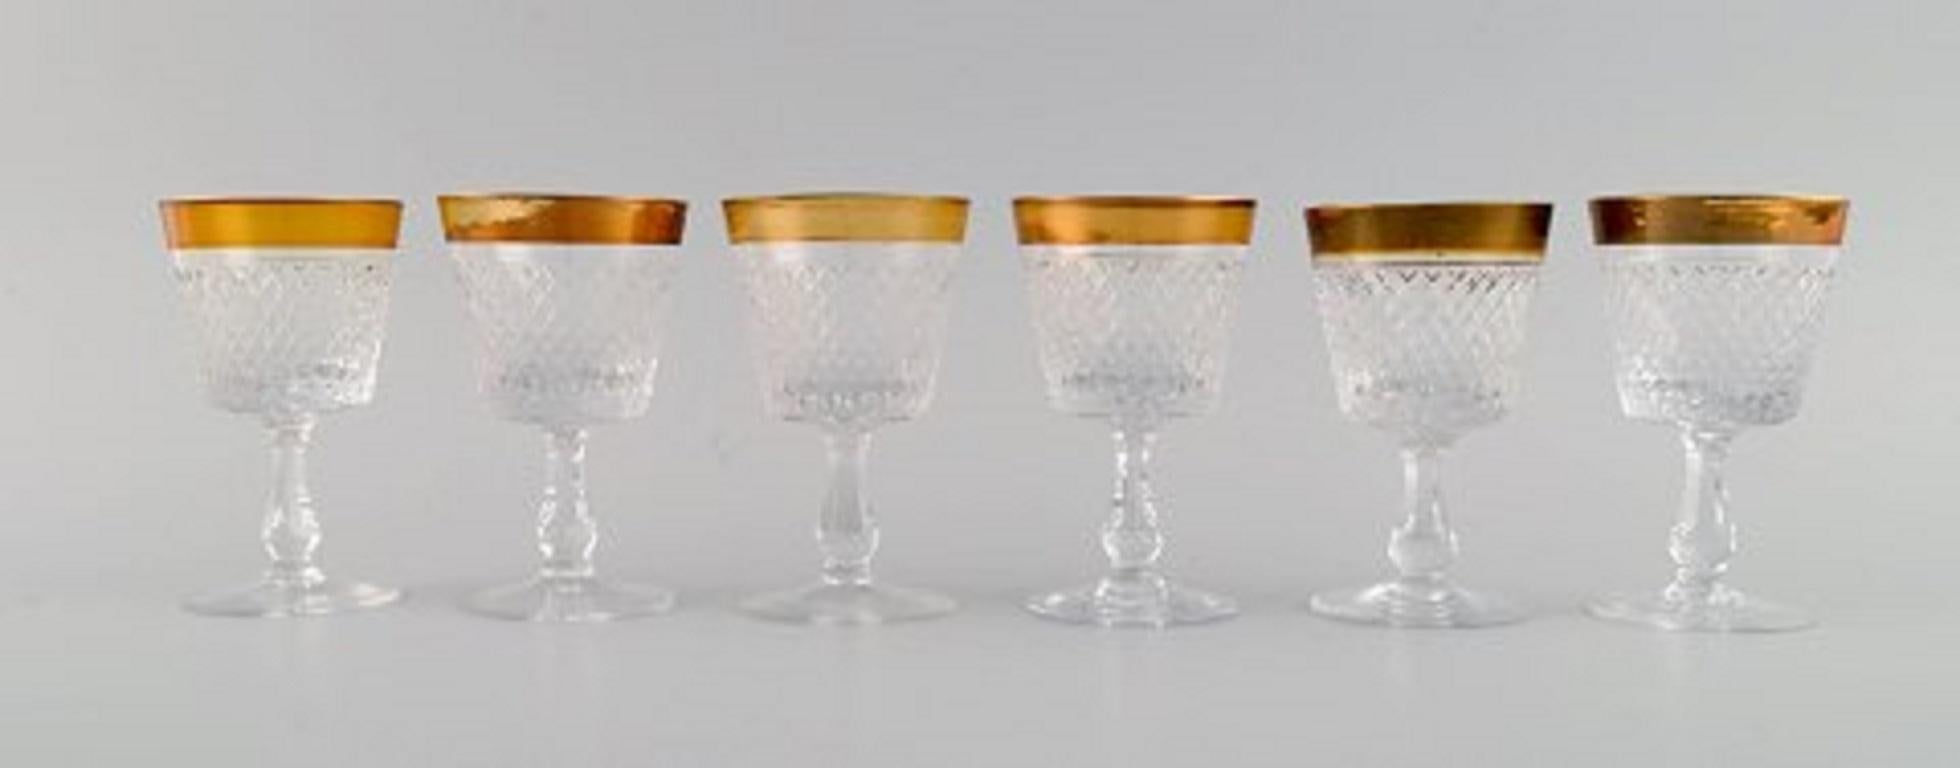 14 glasses in mouth-blown crystal glass with gold edge, France, 1930s.
Consisting of five wine, two champagne and seven sherry glasses.
Champagne glass measures: 16.5 x 6.2 cm.
Sherry glass measures: 10.5 x 6.5 cm.
In excellent condition with